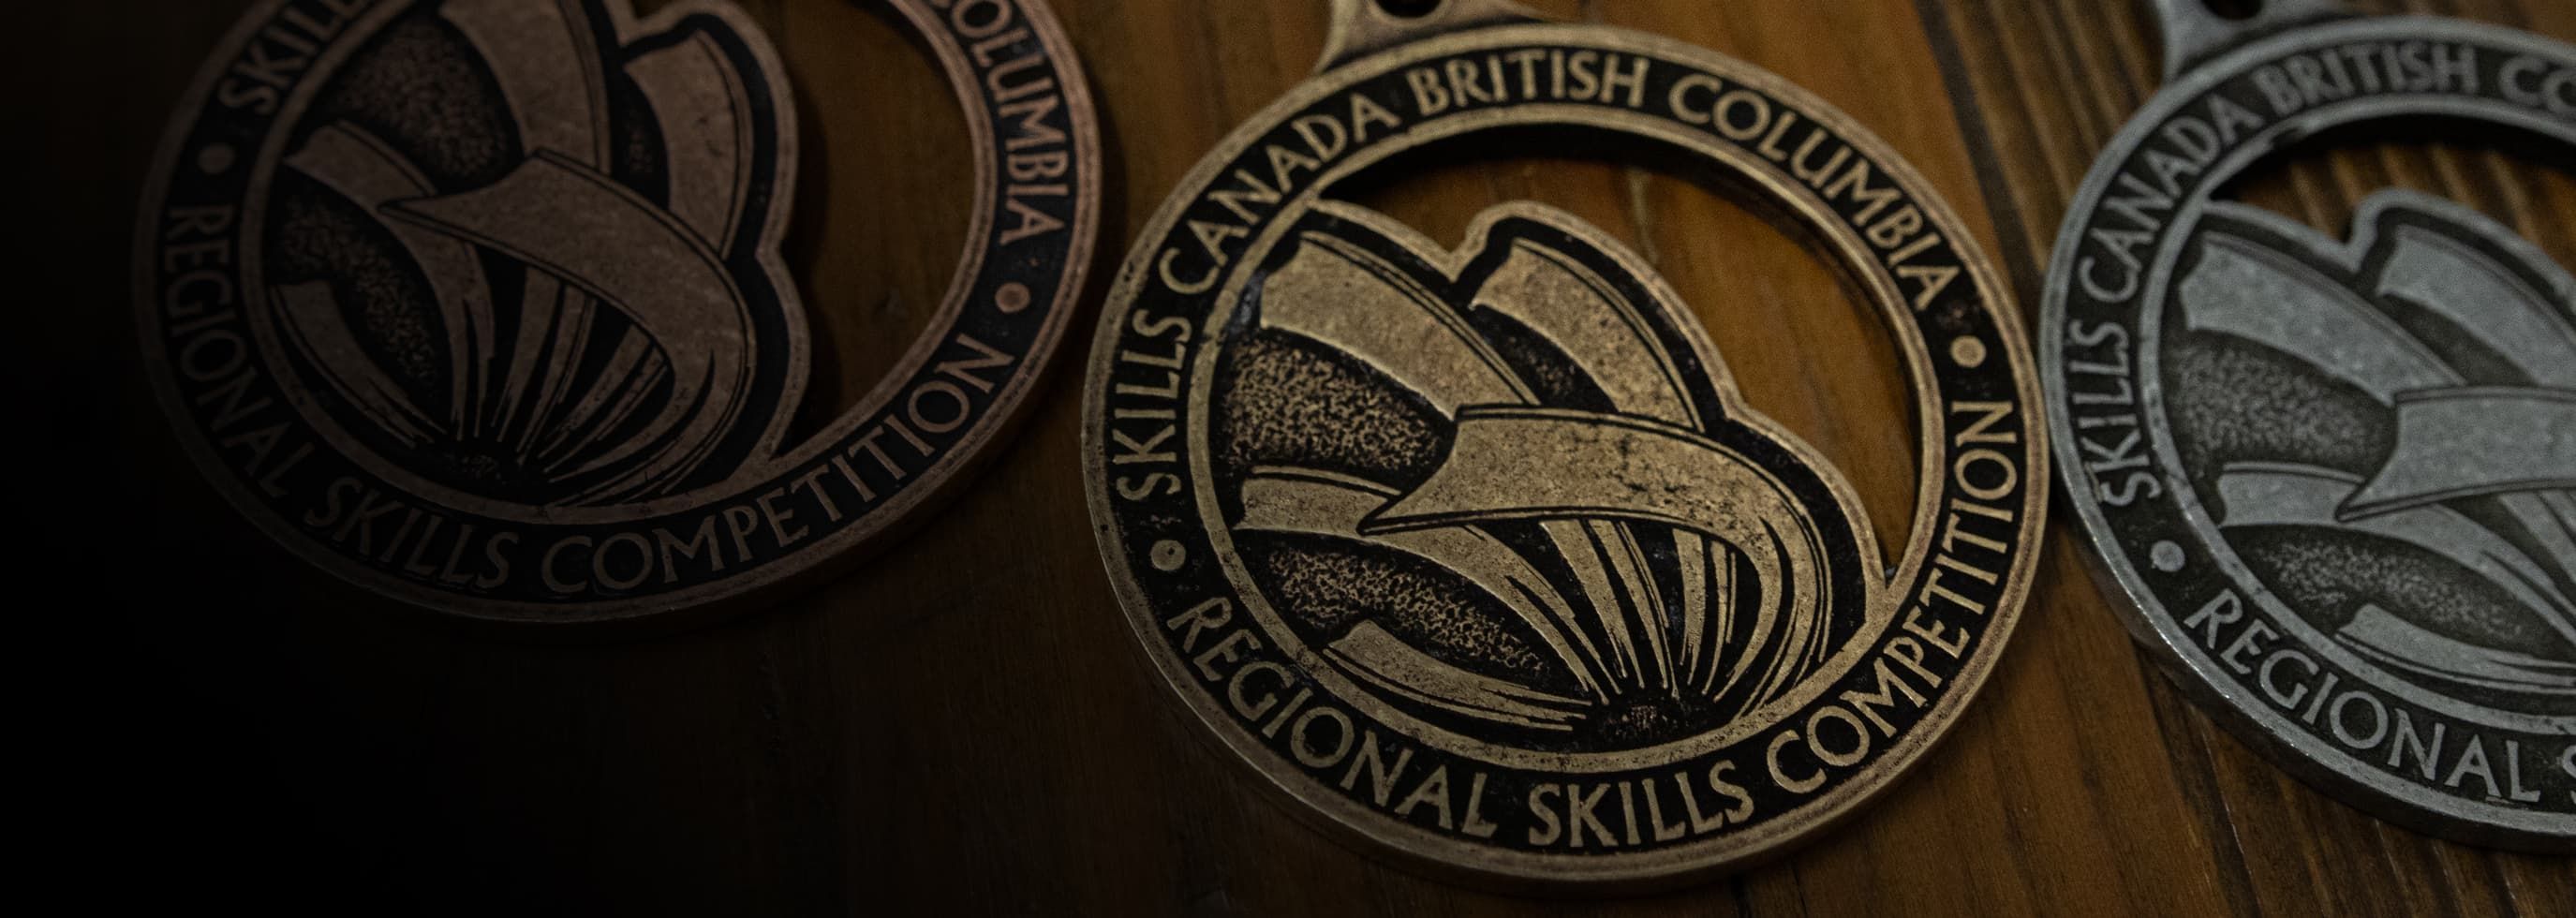 Three medals laying on the table, each bearing the words Skills Canada British Columbia Regional Skills Competition.